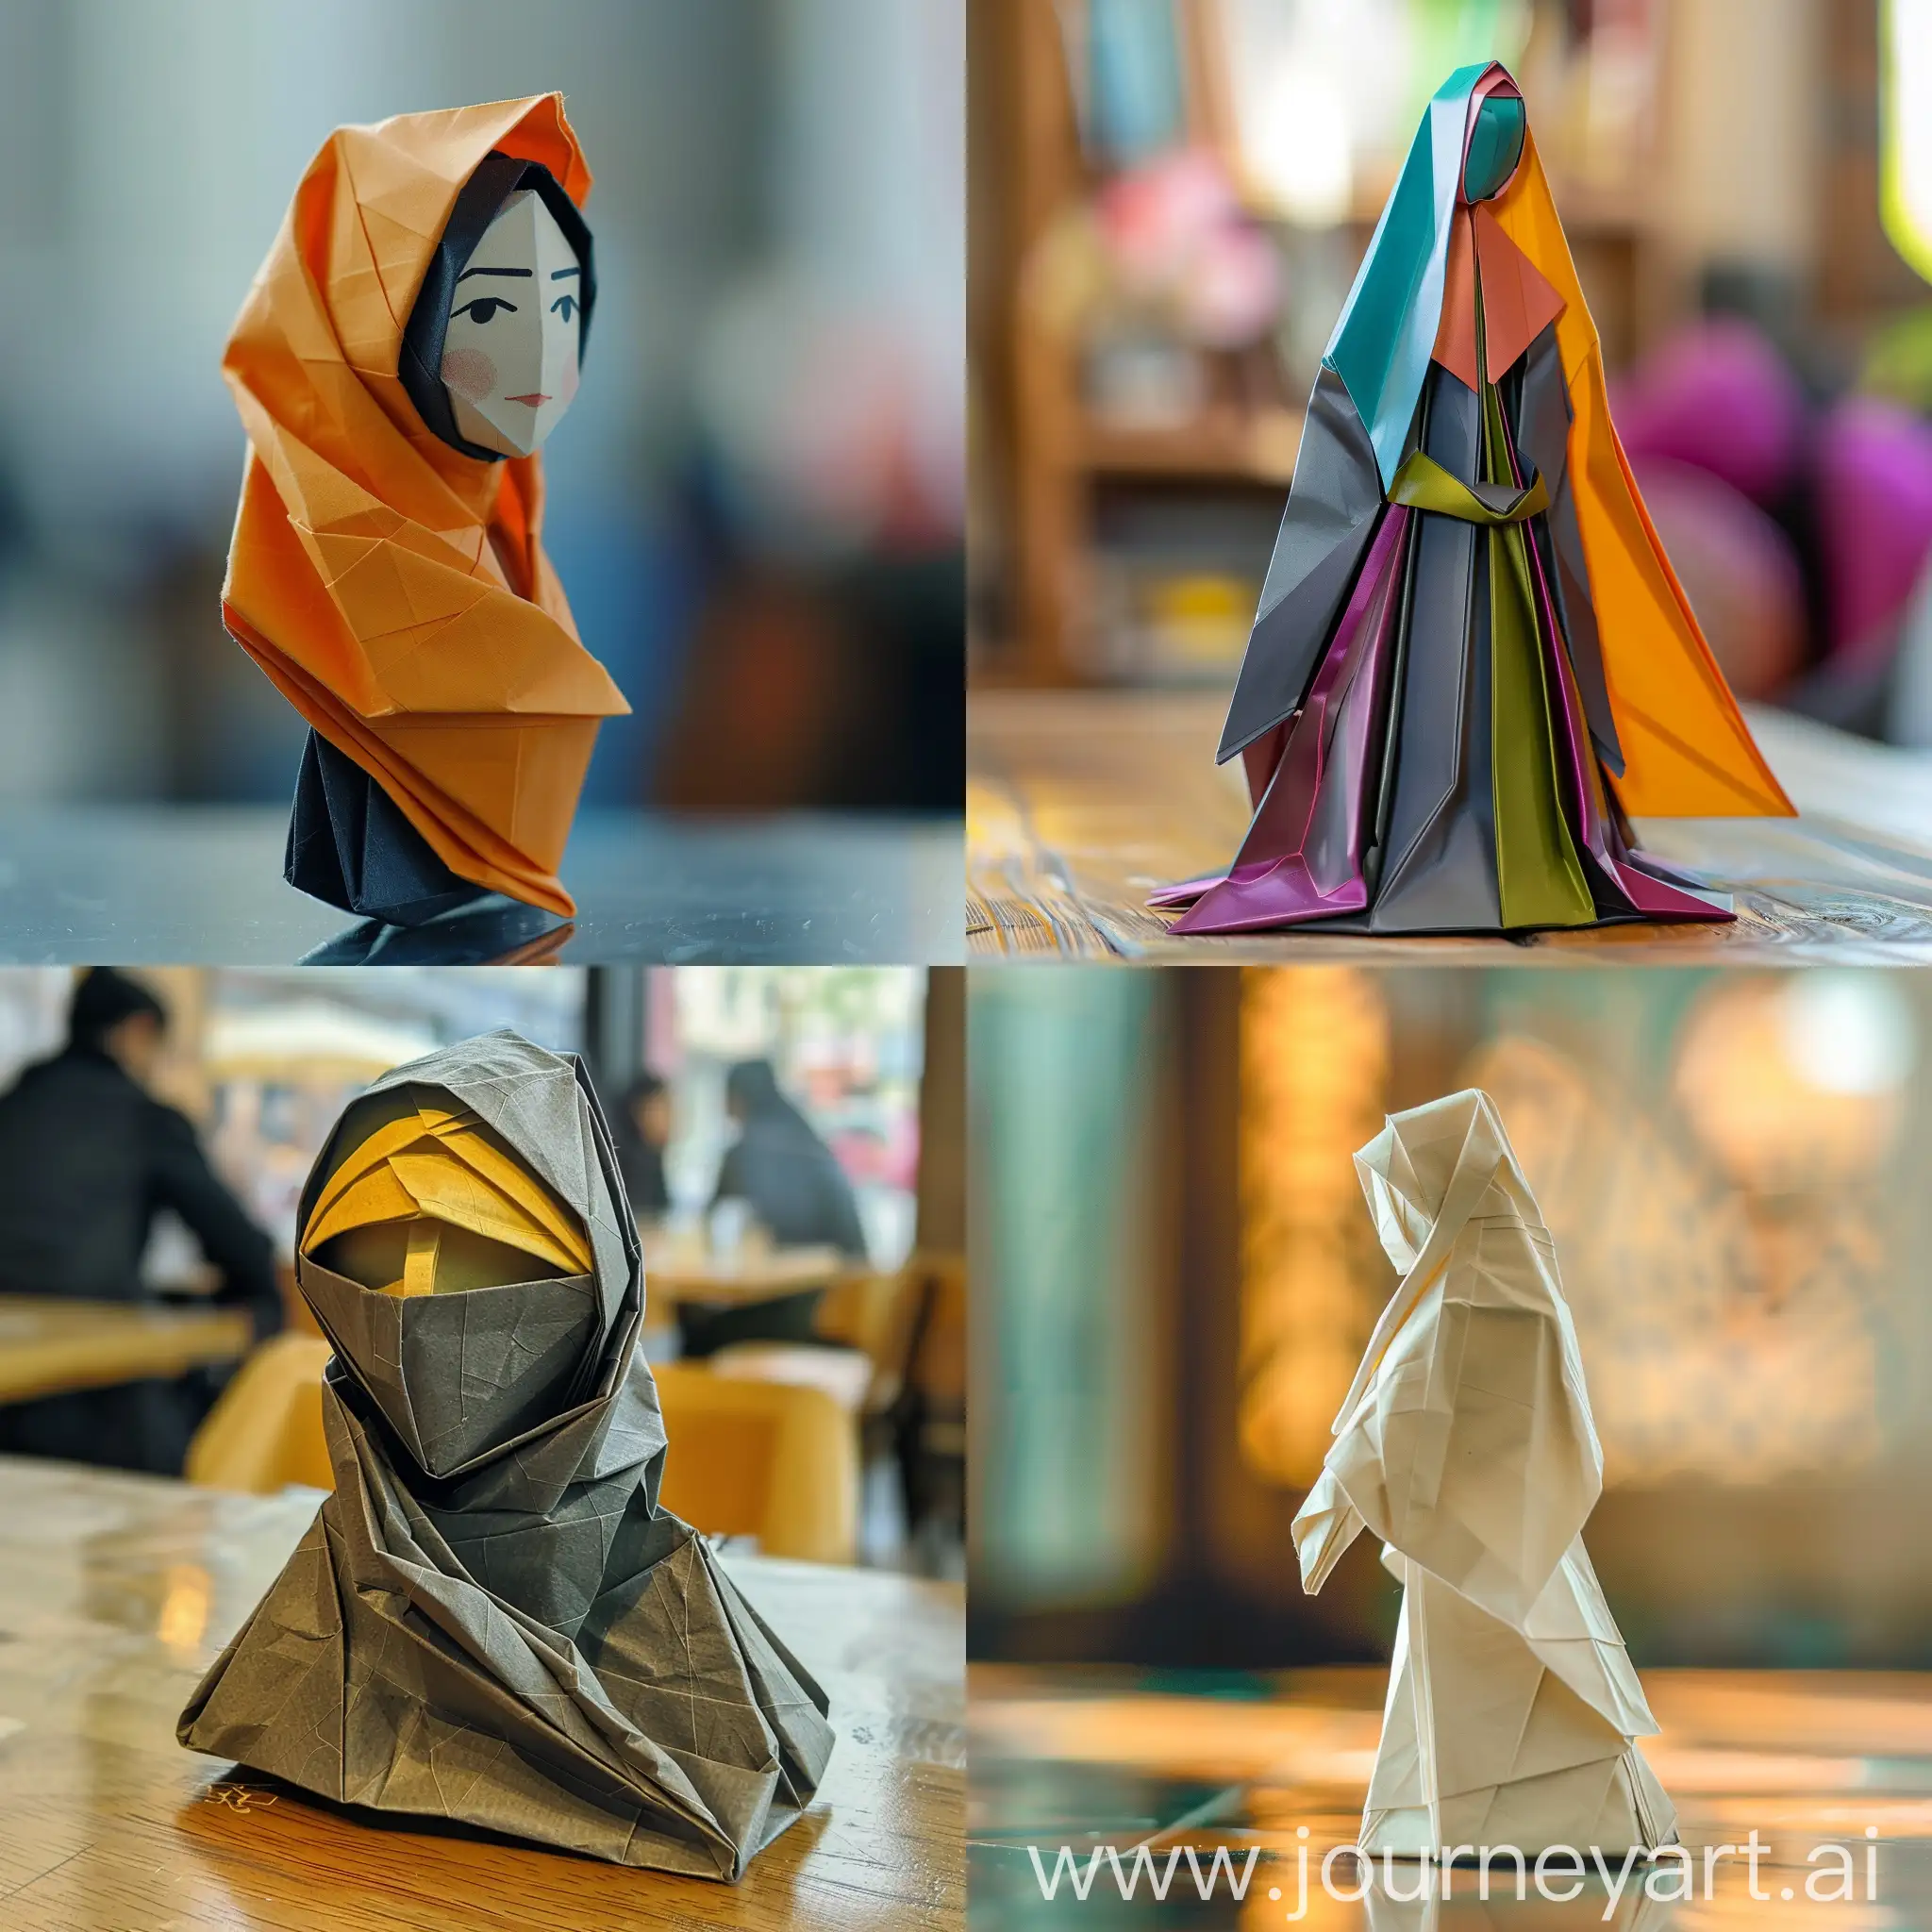 CloseUp-Origami-Woman-with-Hijab-on-Table